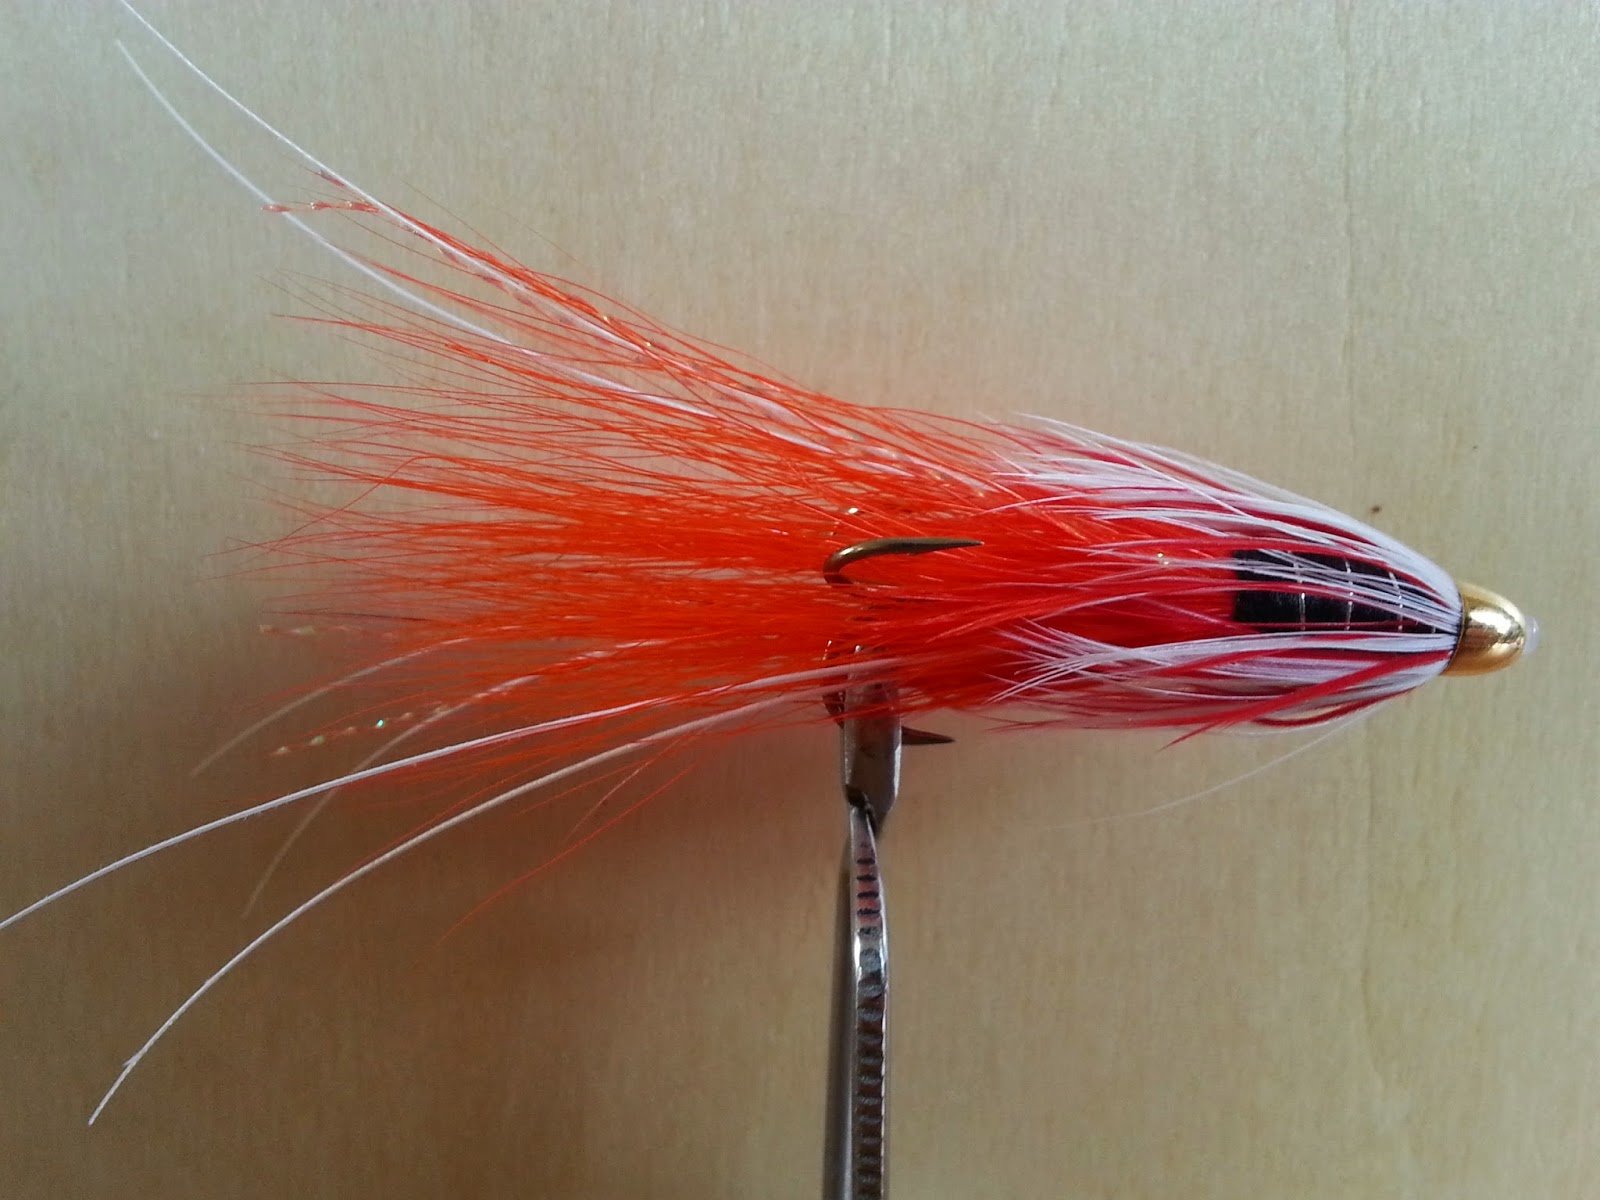 How To Tie Red Frances Salmon Tube Fly - Tying the Red Francis Shrimp Salmo...